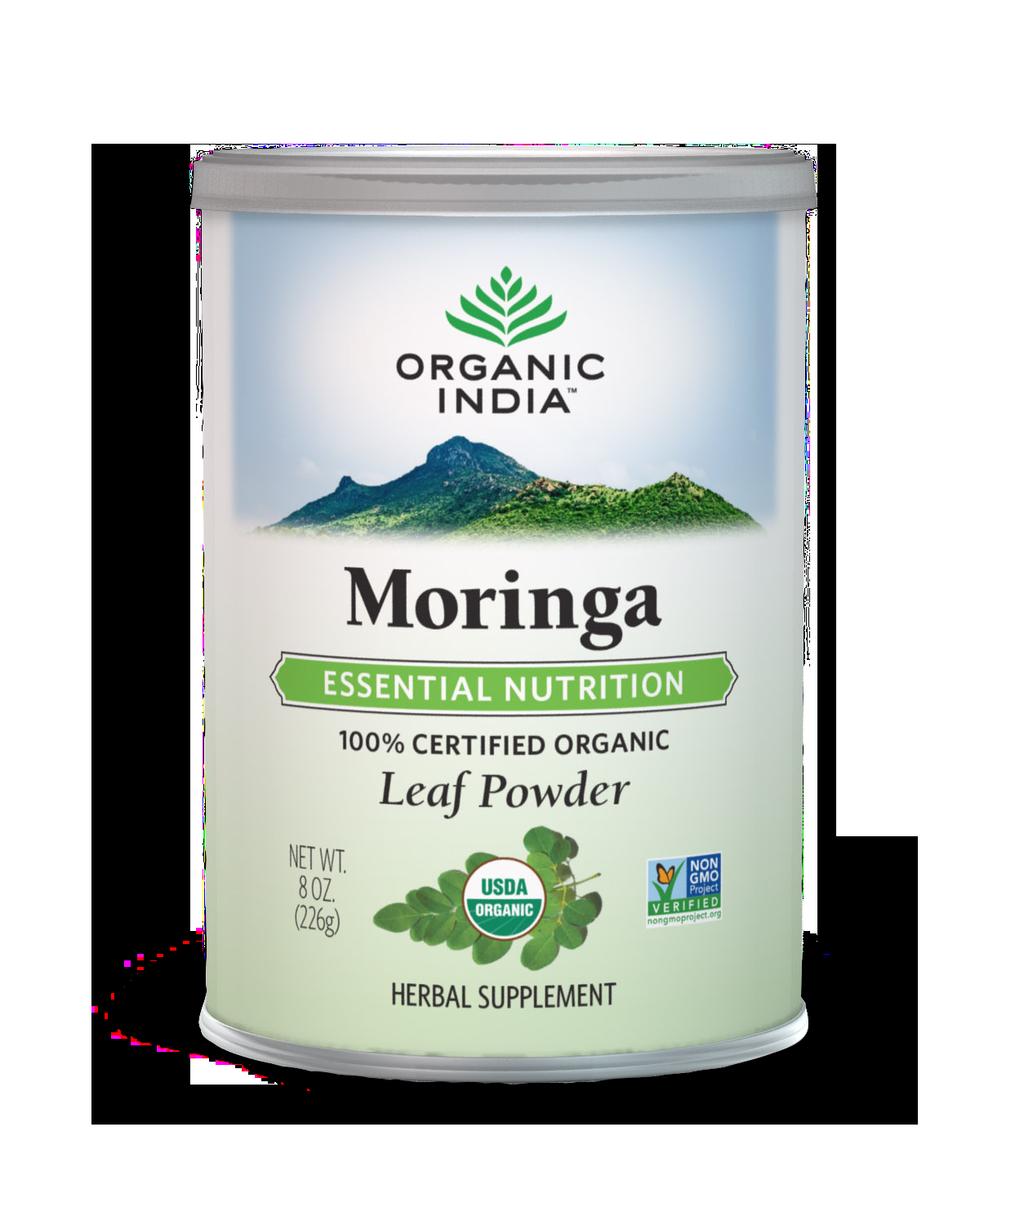 Moringa is considered one of the most complete and nutrient-dense plants on earth.